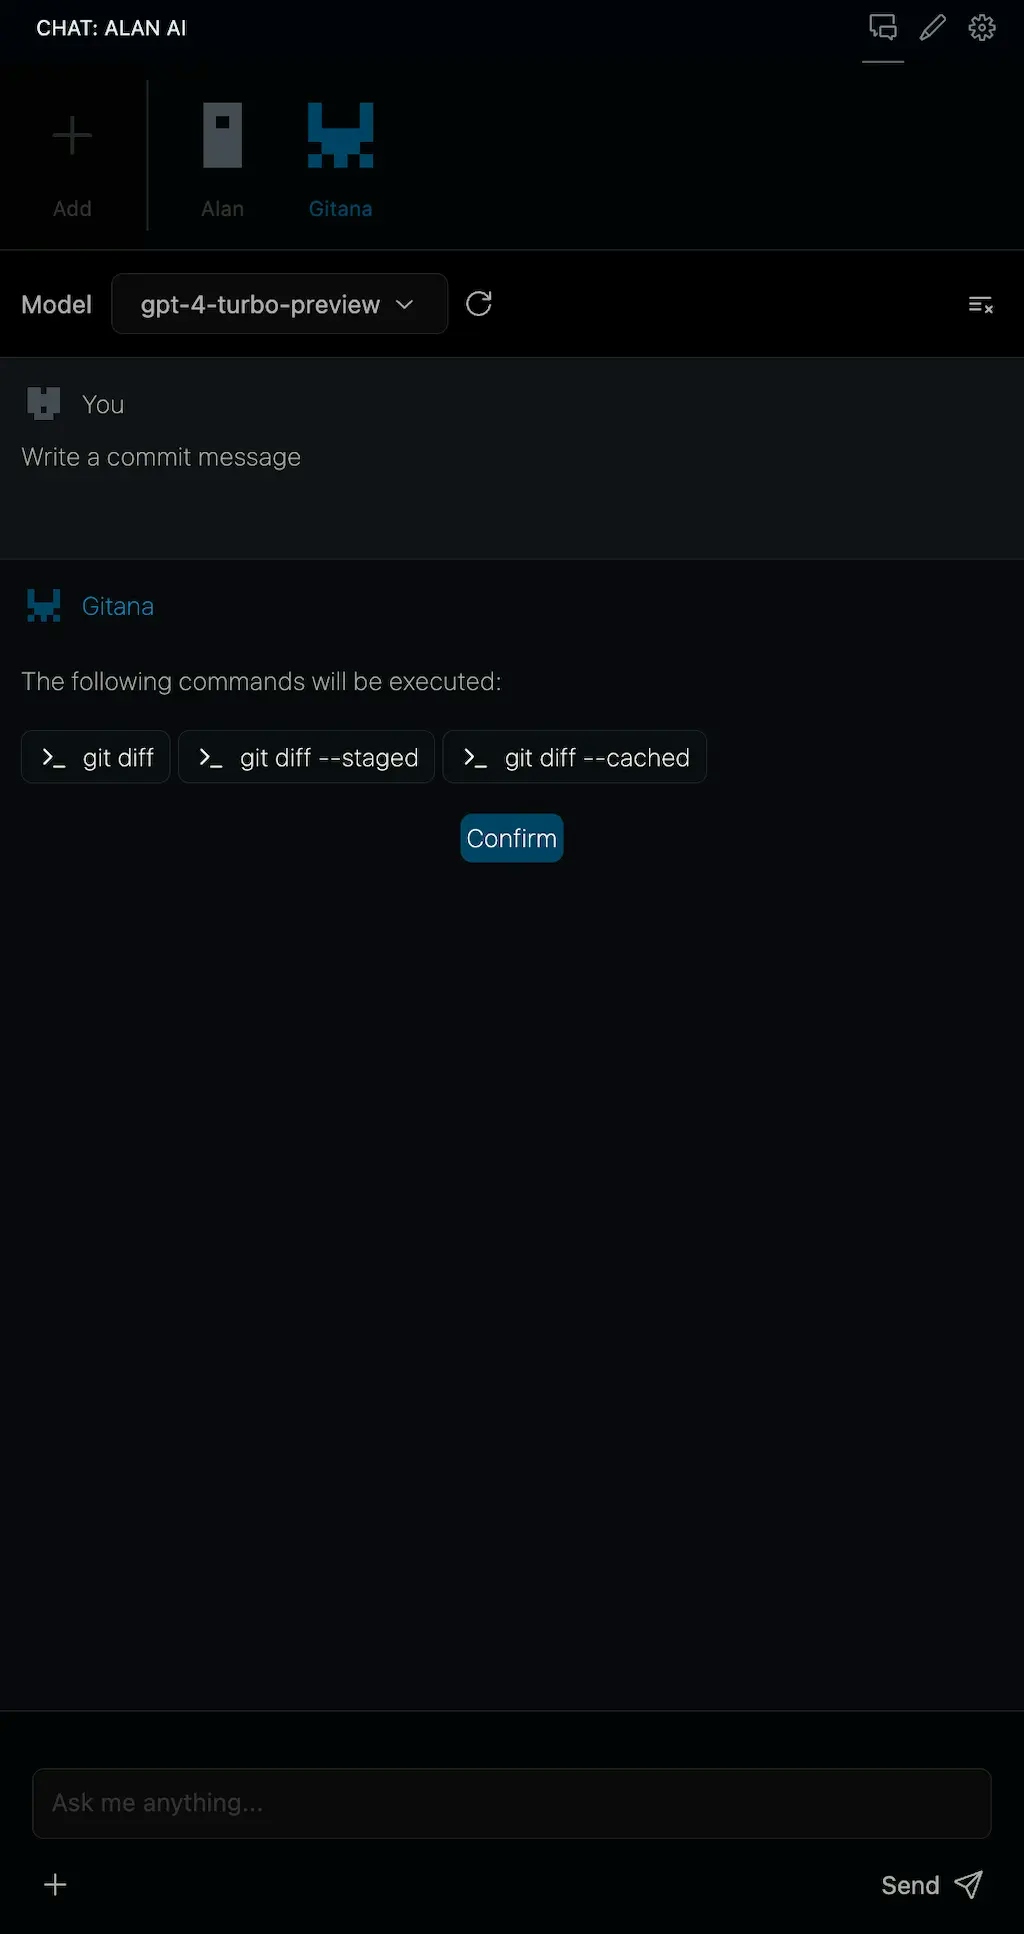 Screenshot of a chat interface with a dark theme, showing a conversation
between the user and a contact named Gitana. The user is prompted to write a
commit message, and Gitana lists the following commands to be executed: git diff,
git diff --staged, and git diff --cached. There is a "Confirm" button below the commands,
and at the bottom of the screen is an input field with the placeholder text "Ask me anything..."
and a send button. The interface includes icons for adding attachments, a settings
gear, and a dropdown menu labeled "Model gpt-4-turbo-preview.
